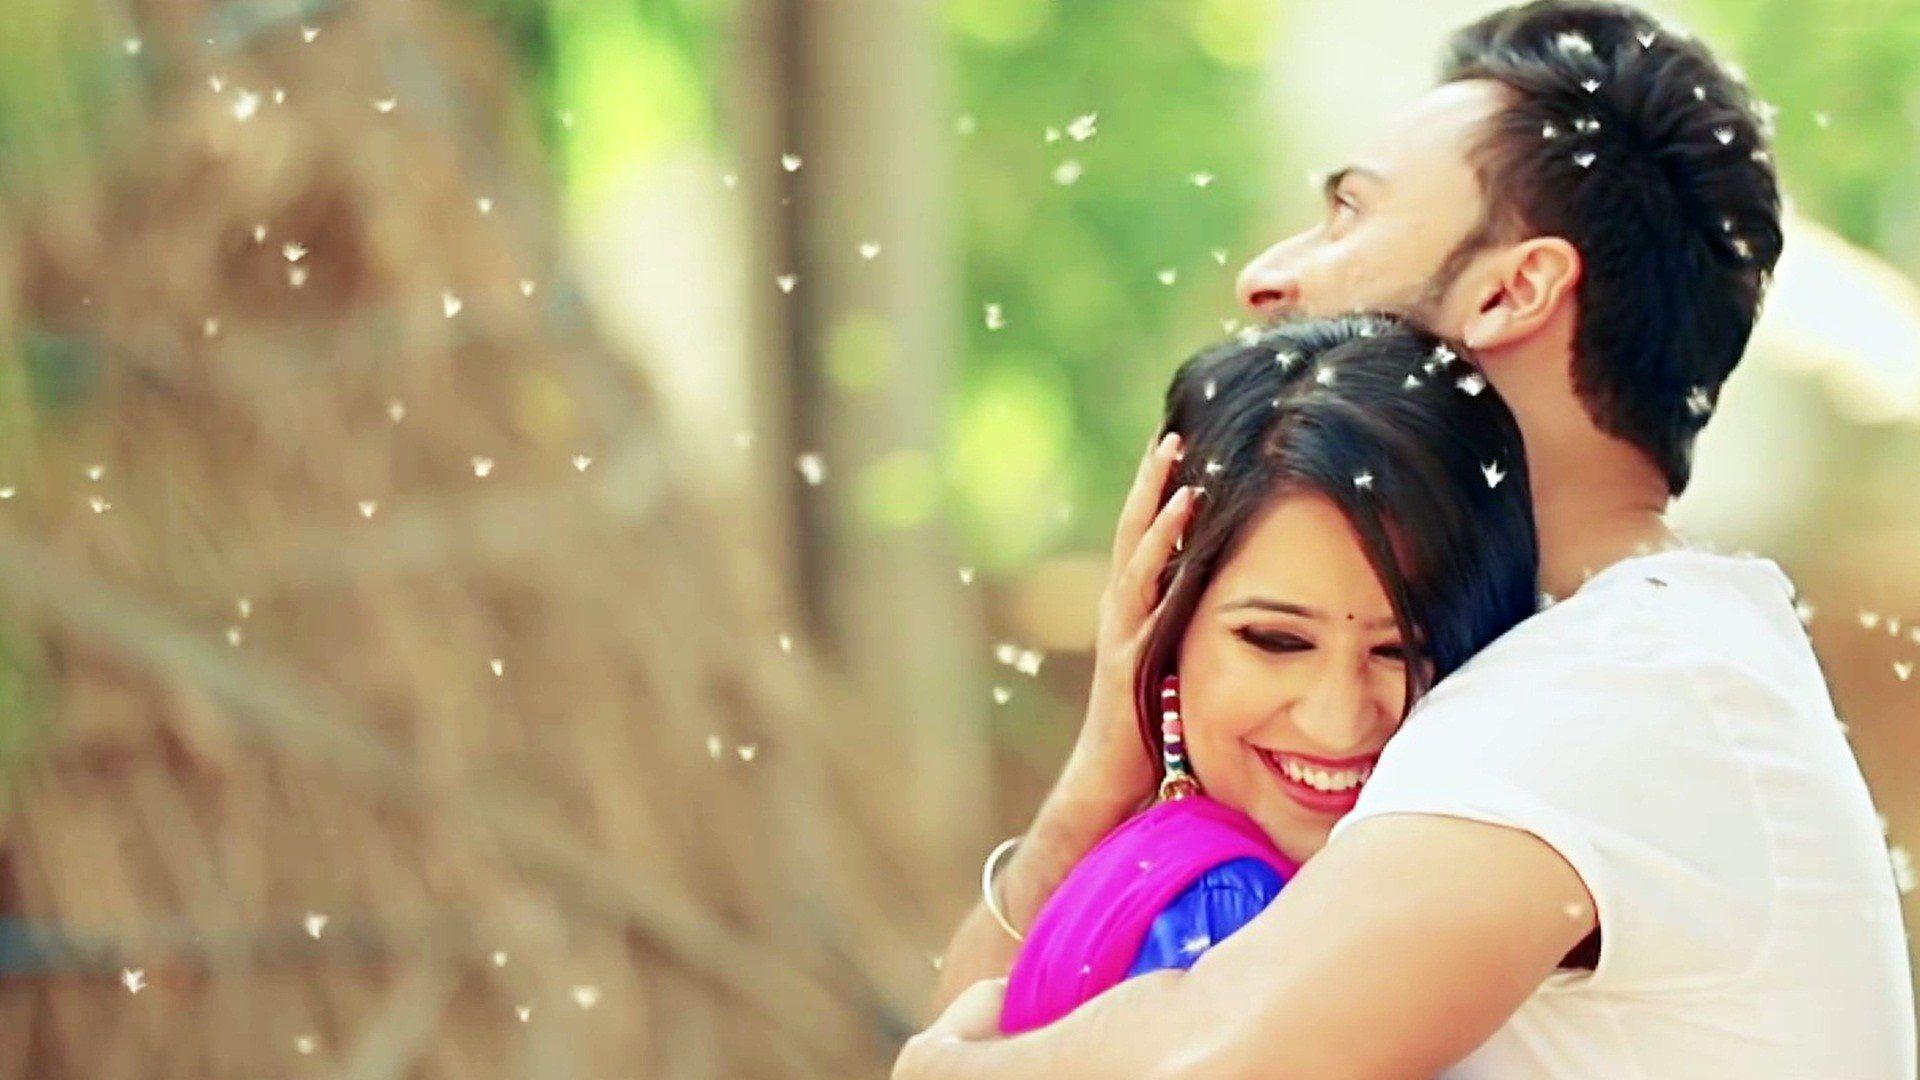 Romantic bollywood movie wallpaper. Indian Love Wallpaper. Romantic love couple, Love couple image, Cute couples cuddling